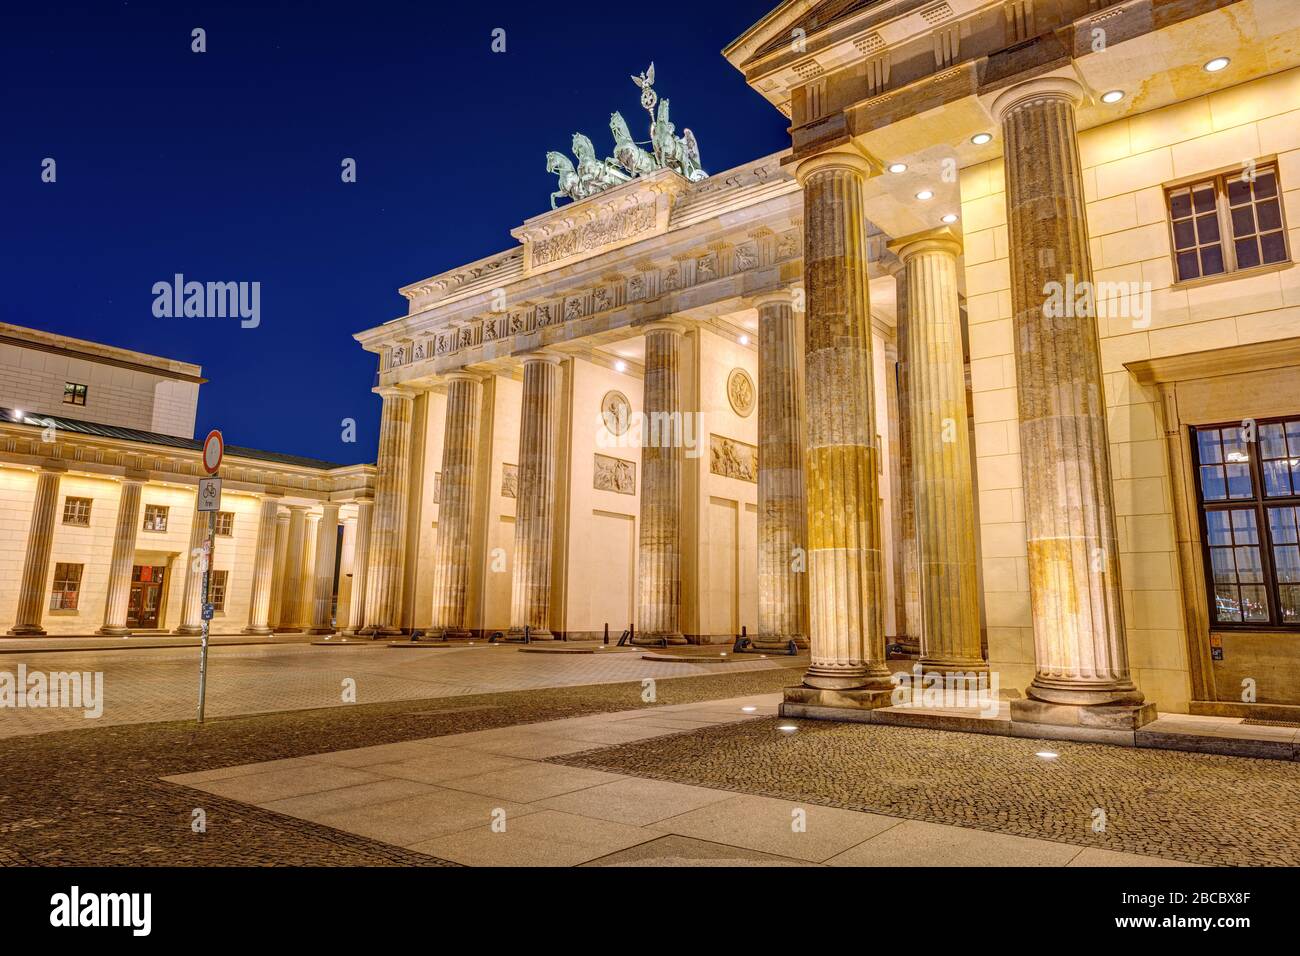 Lateral view of the illuminated Brandenburger Tor in Berlin at night Stock Photo